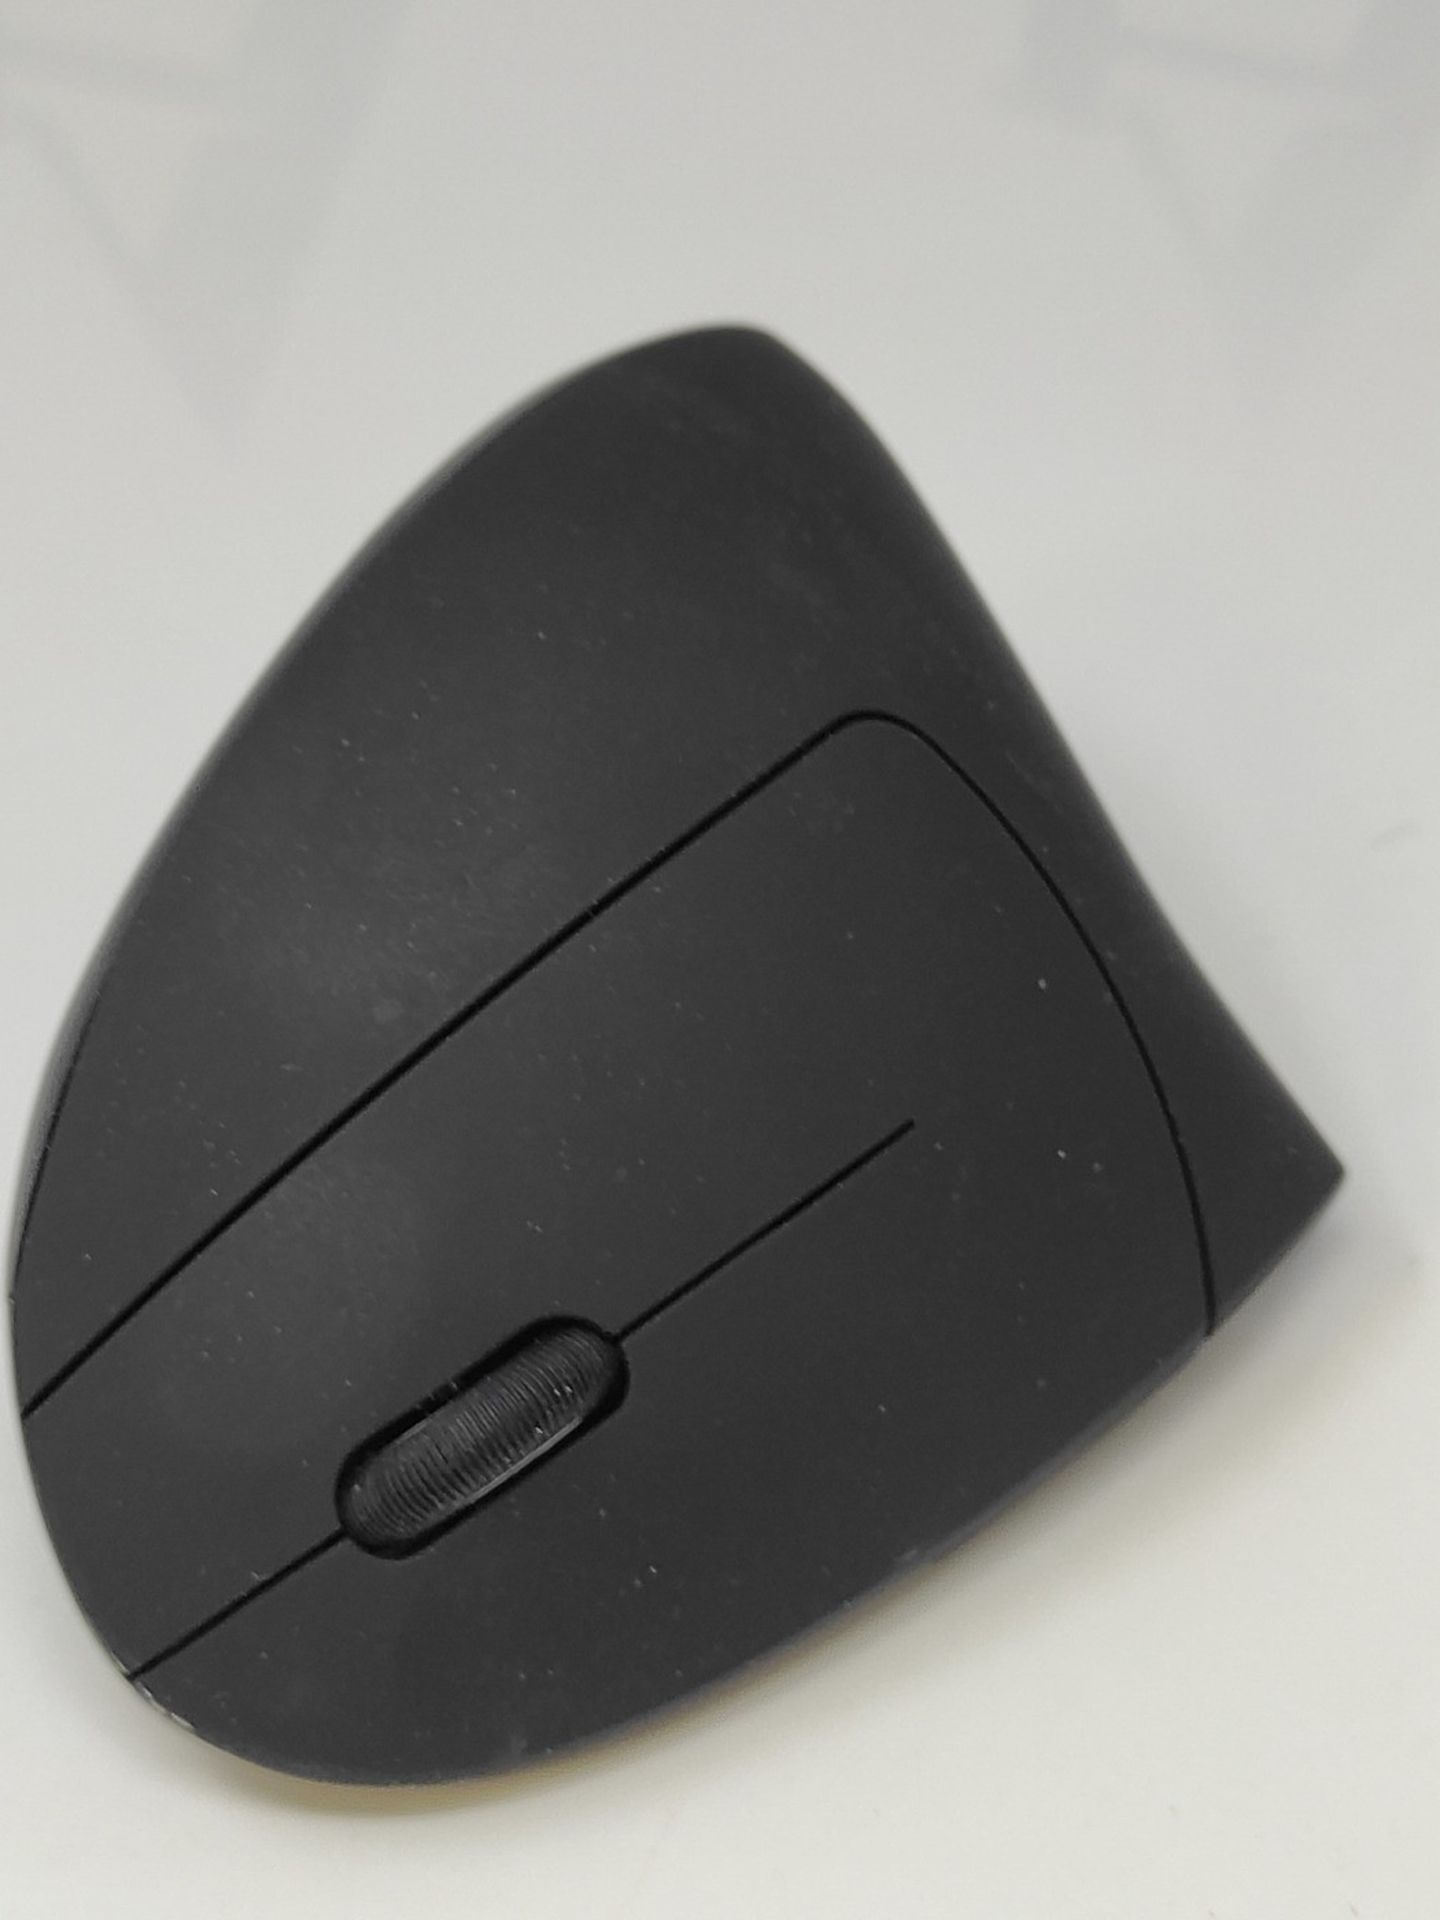 Trust Verto Wireless Vertical Mouse, Ergonomic Vertical Mouse, 800-1600 DPI, 6 Buttons - Image 3 of 6